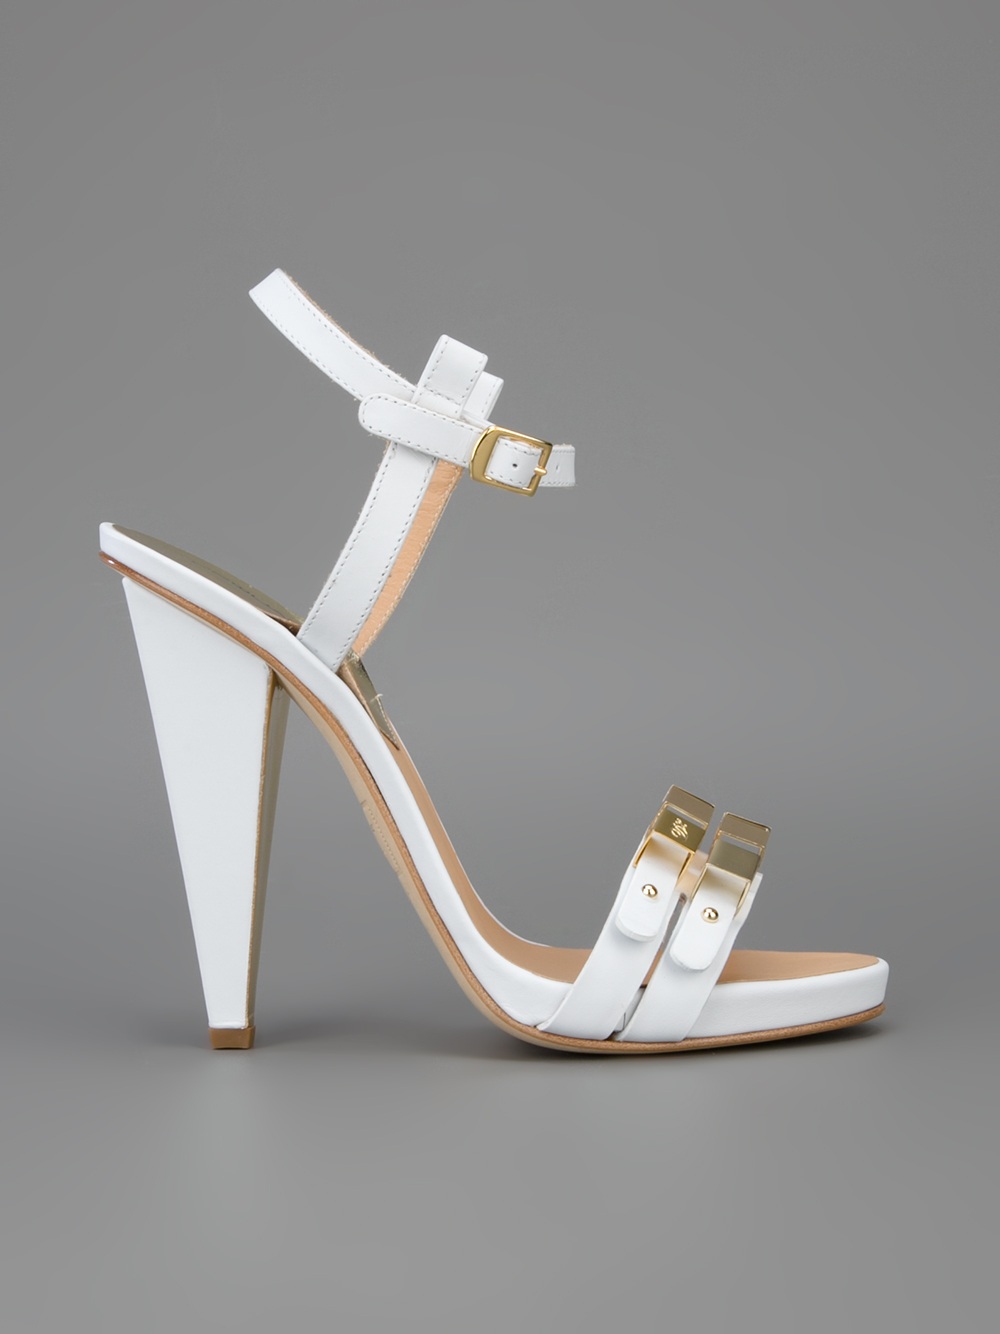 Lyst - Dsquared² Embellished Sandal Pump in White